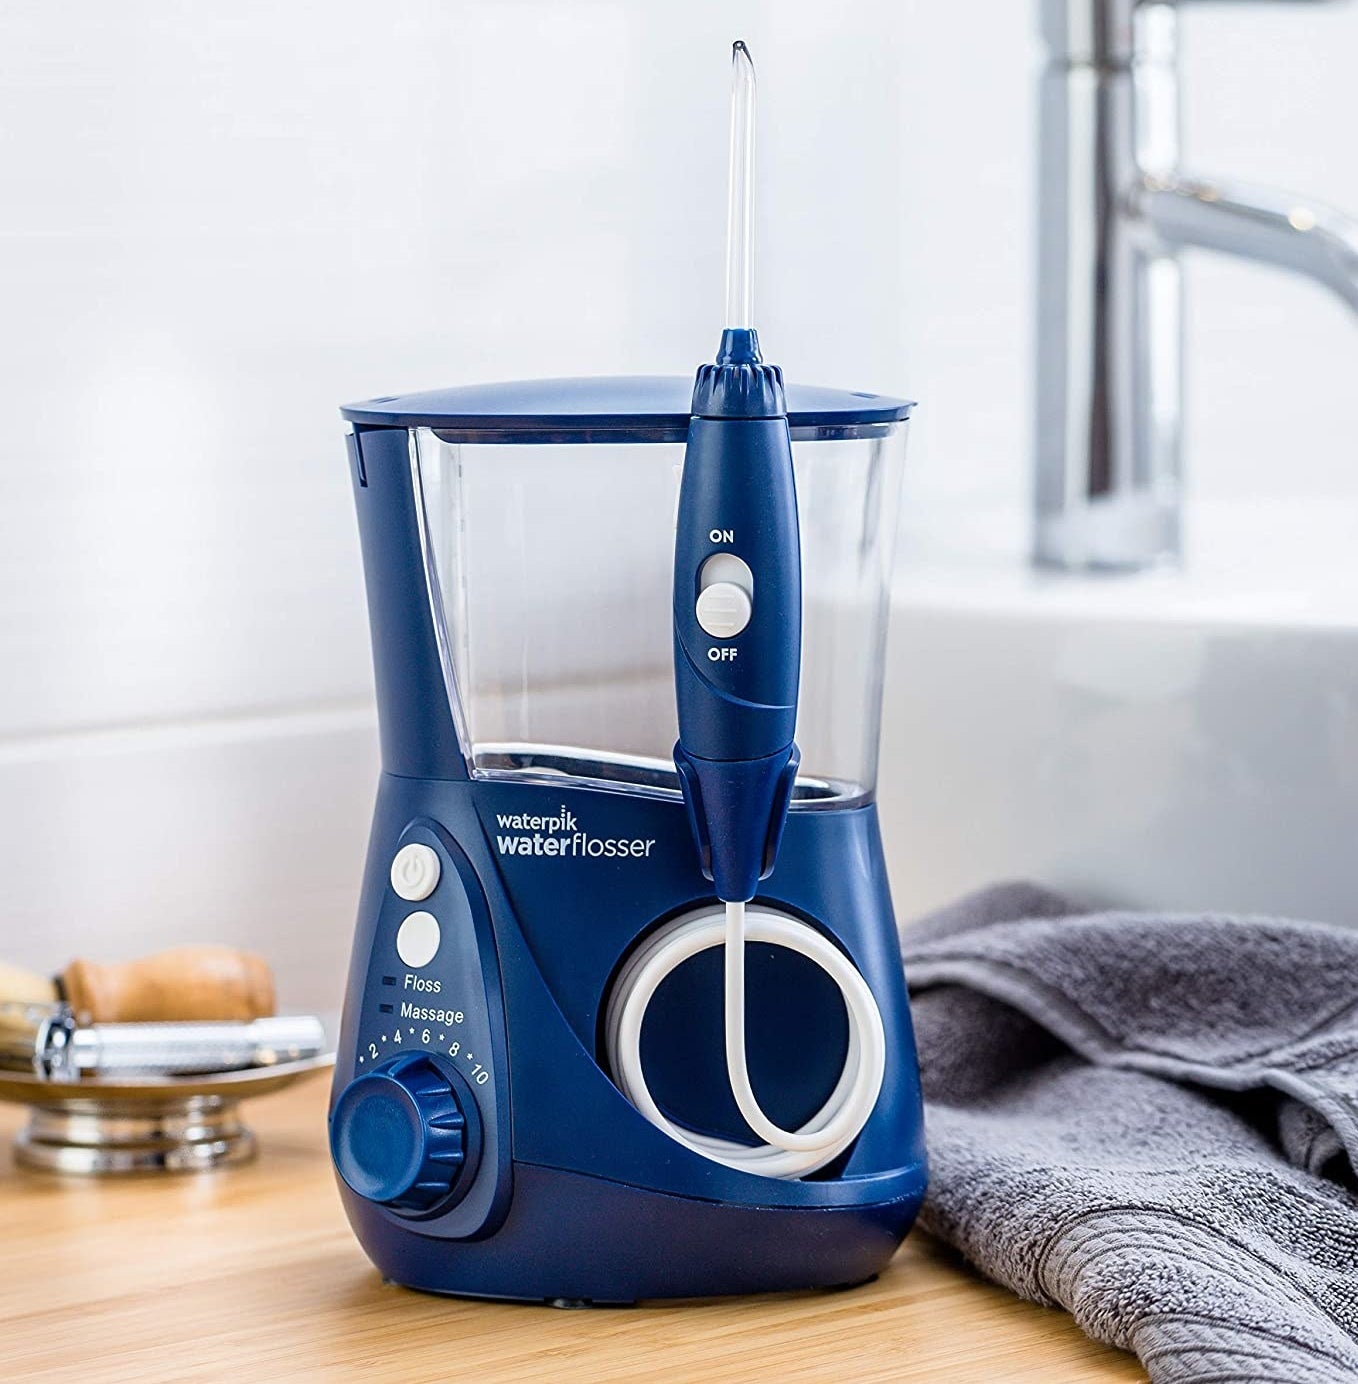 The Waterpik on a counter